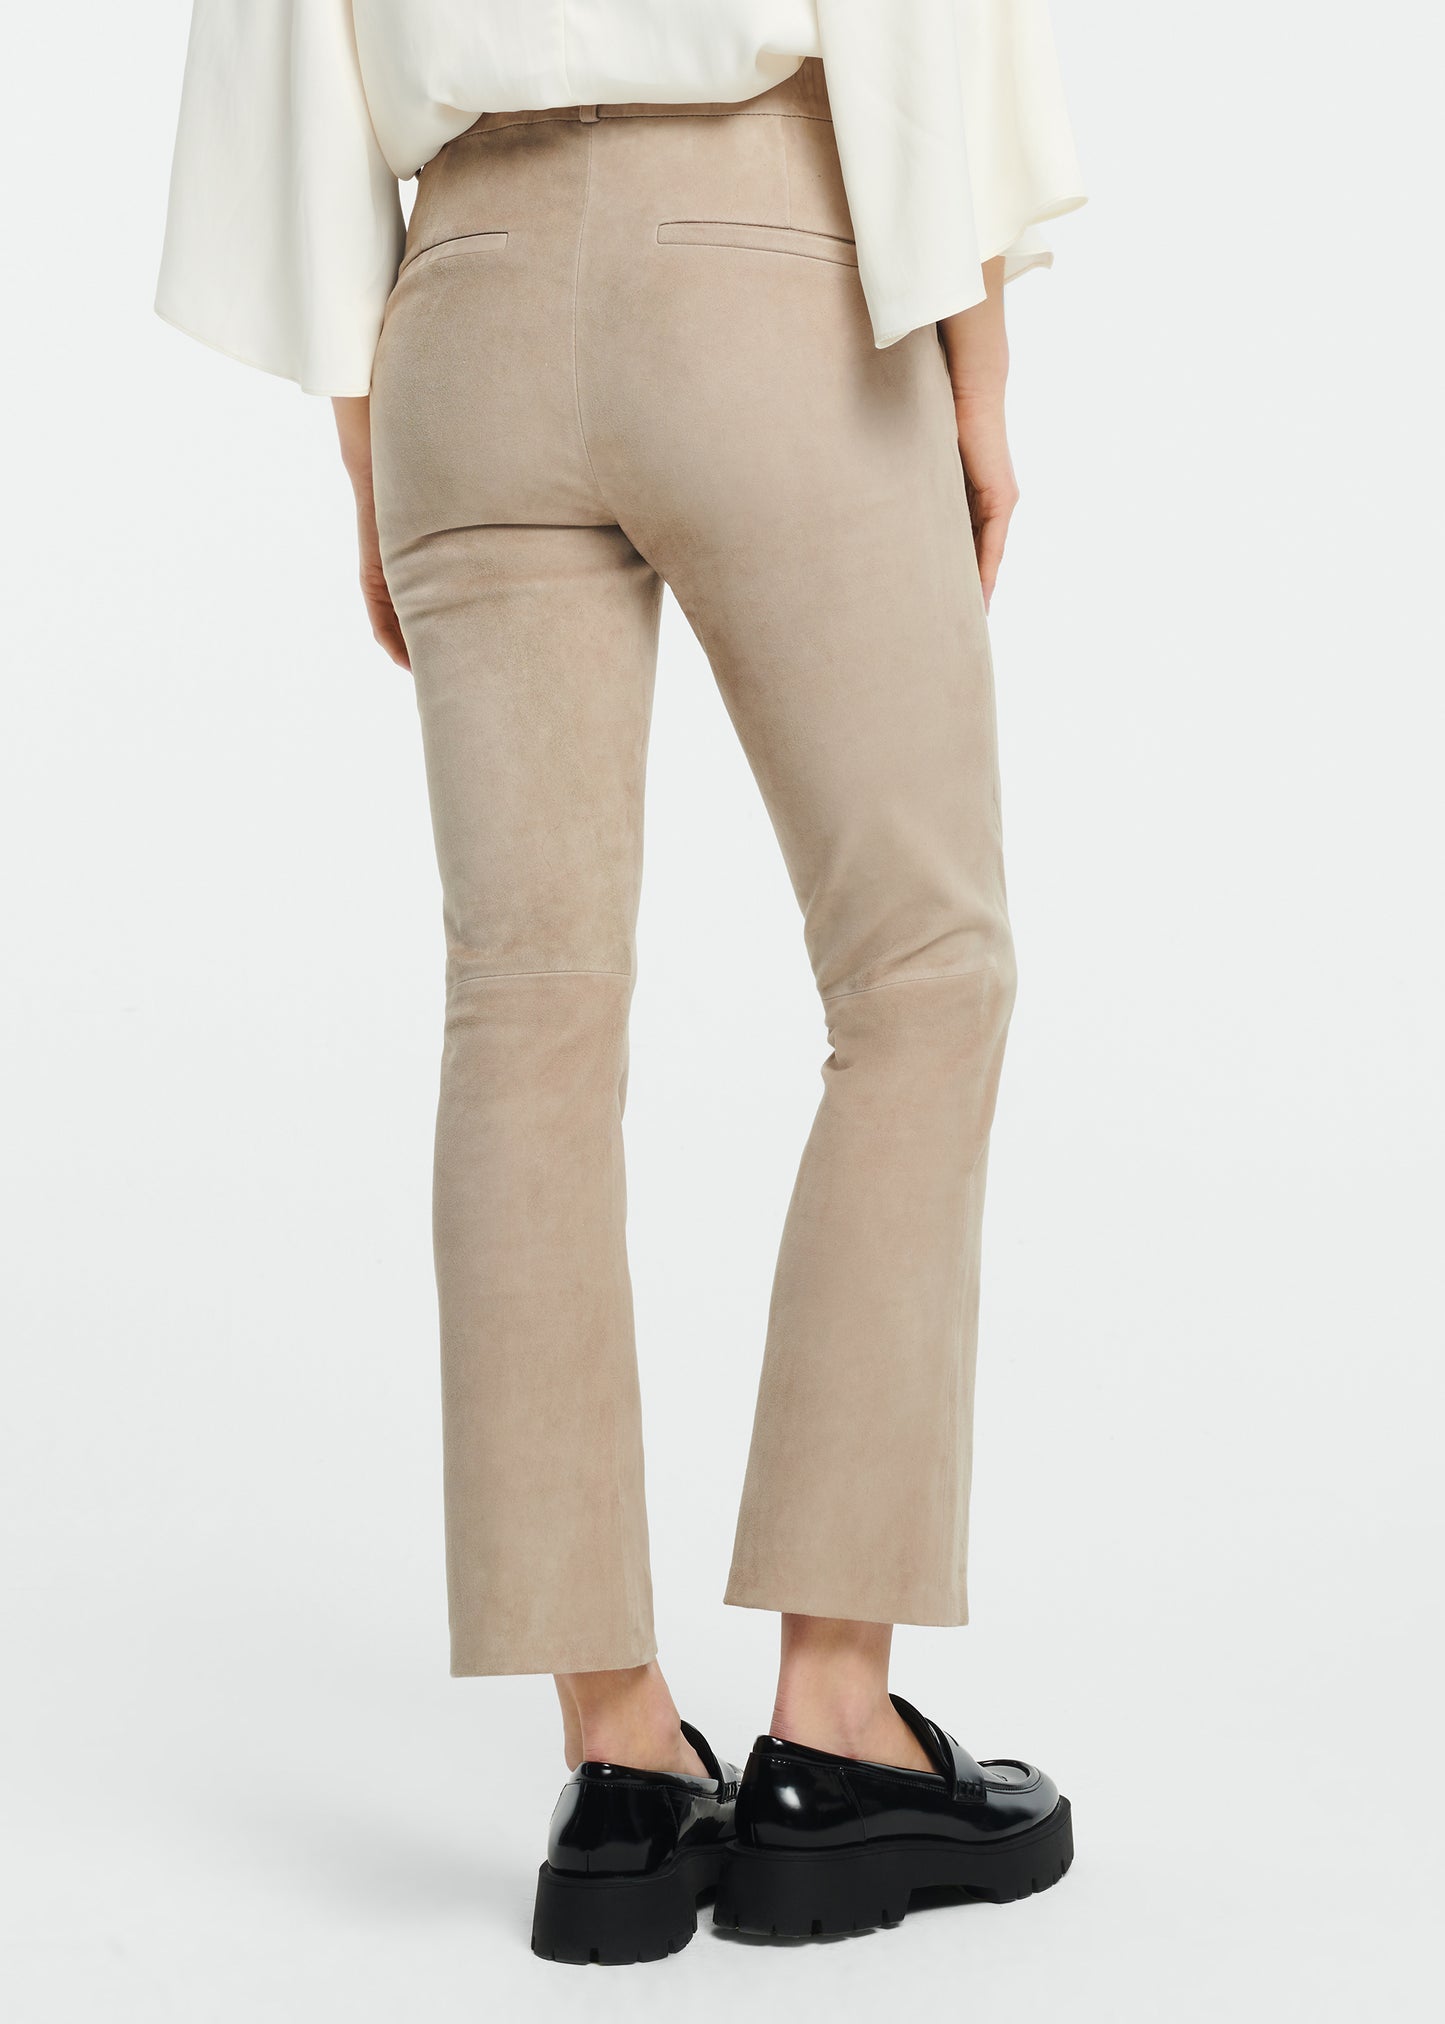 DEANNA Leather Stretch Trousers